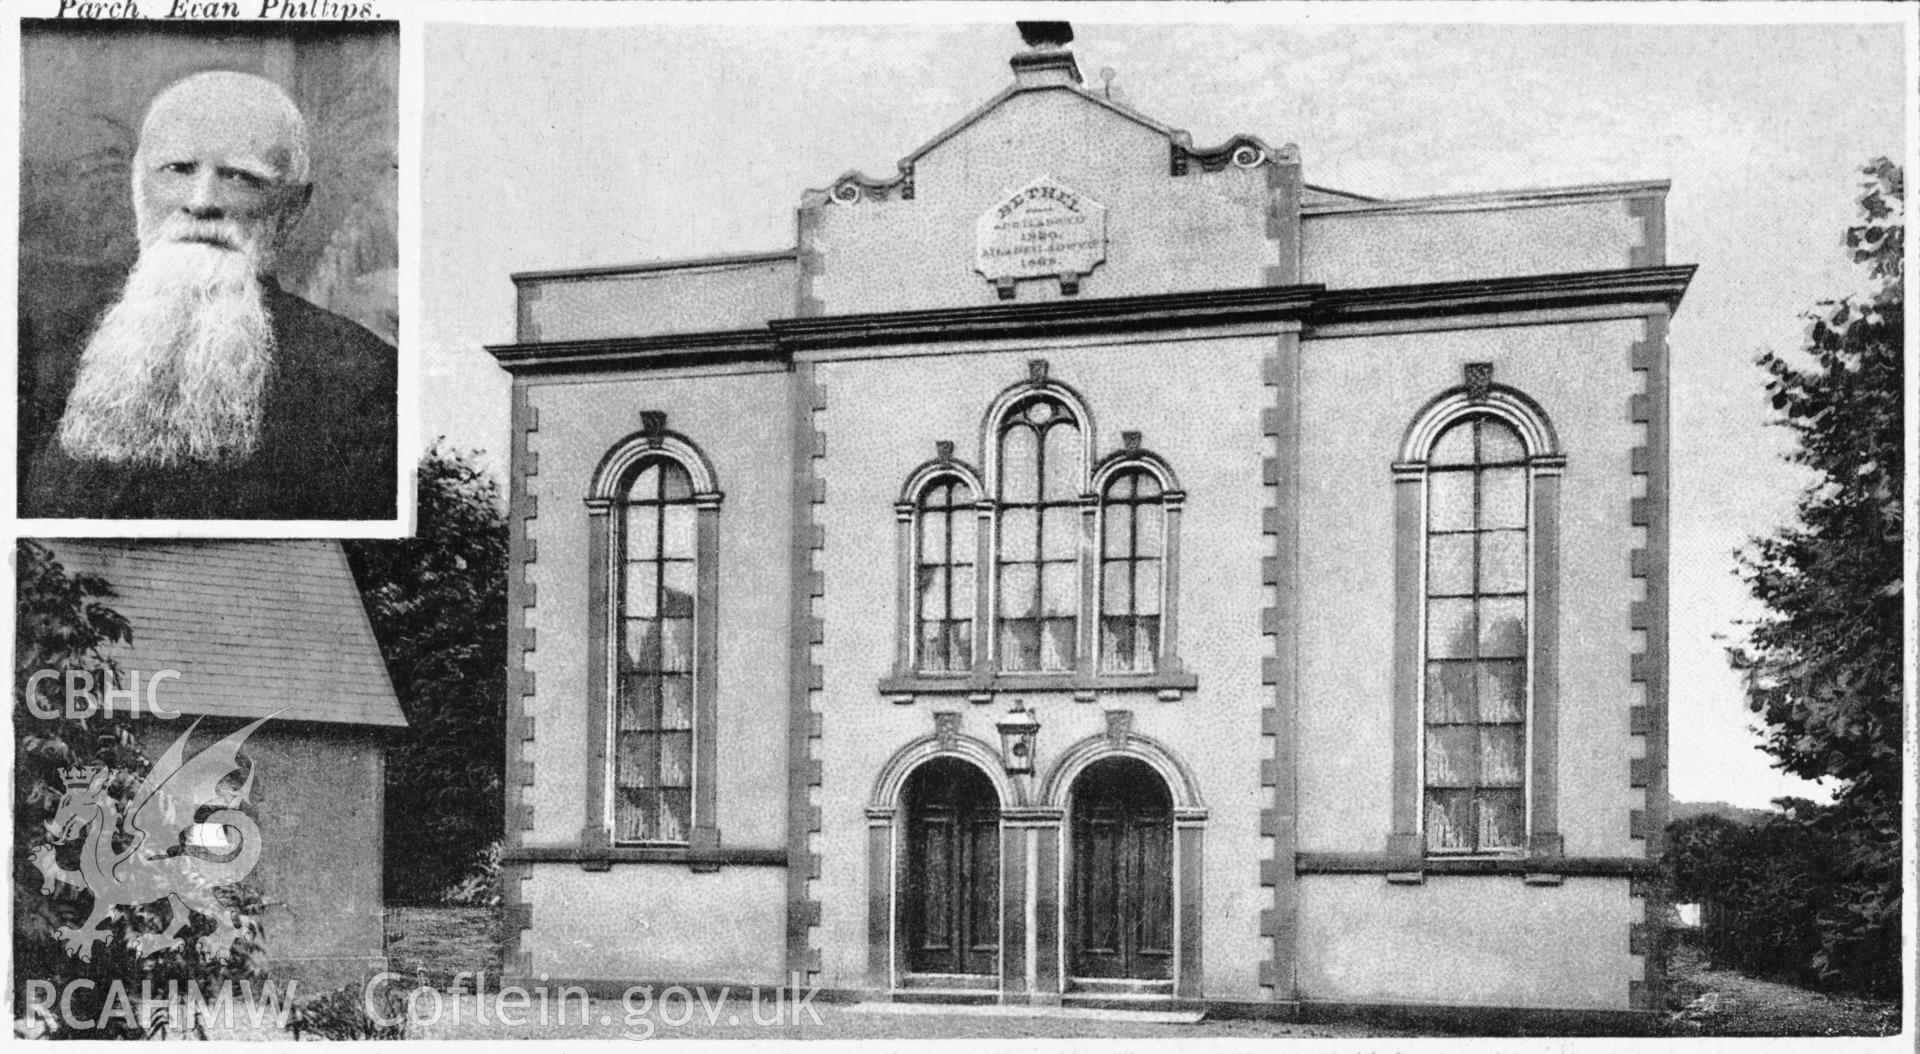 Bethel Chapel, Newcastle Emlyn; B&W print copied from an undated postcard, loaned for copying by Thomas Lloyd.  Copy negative held.